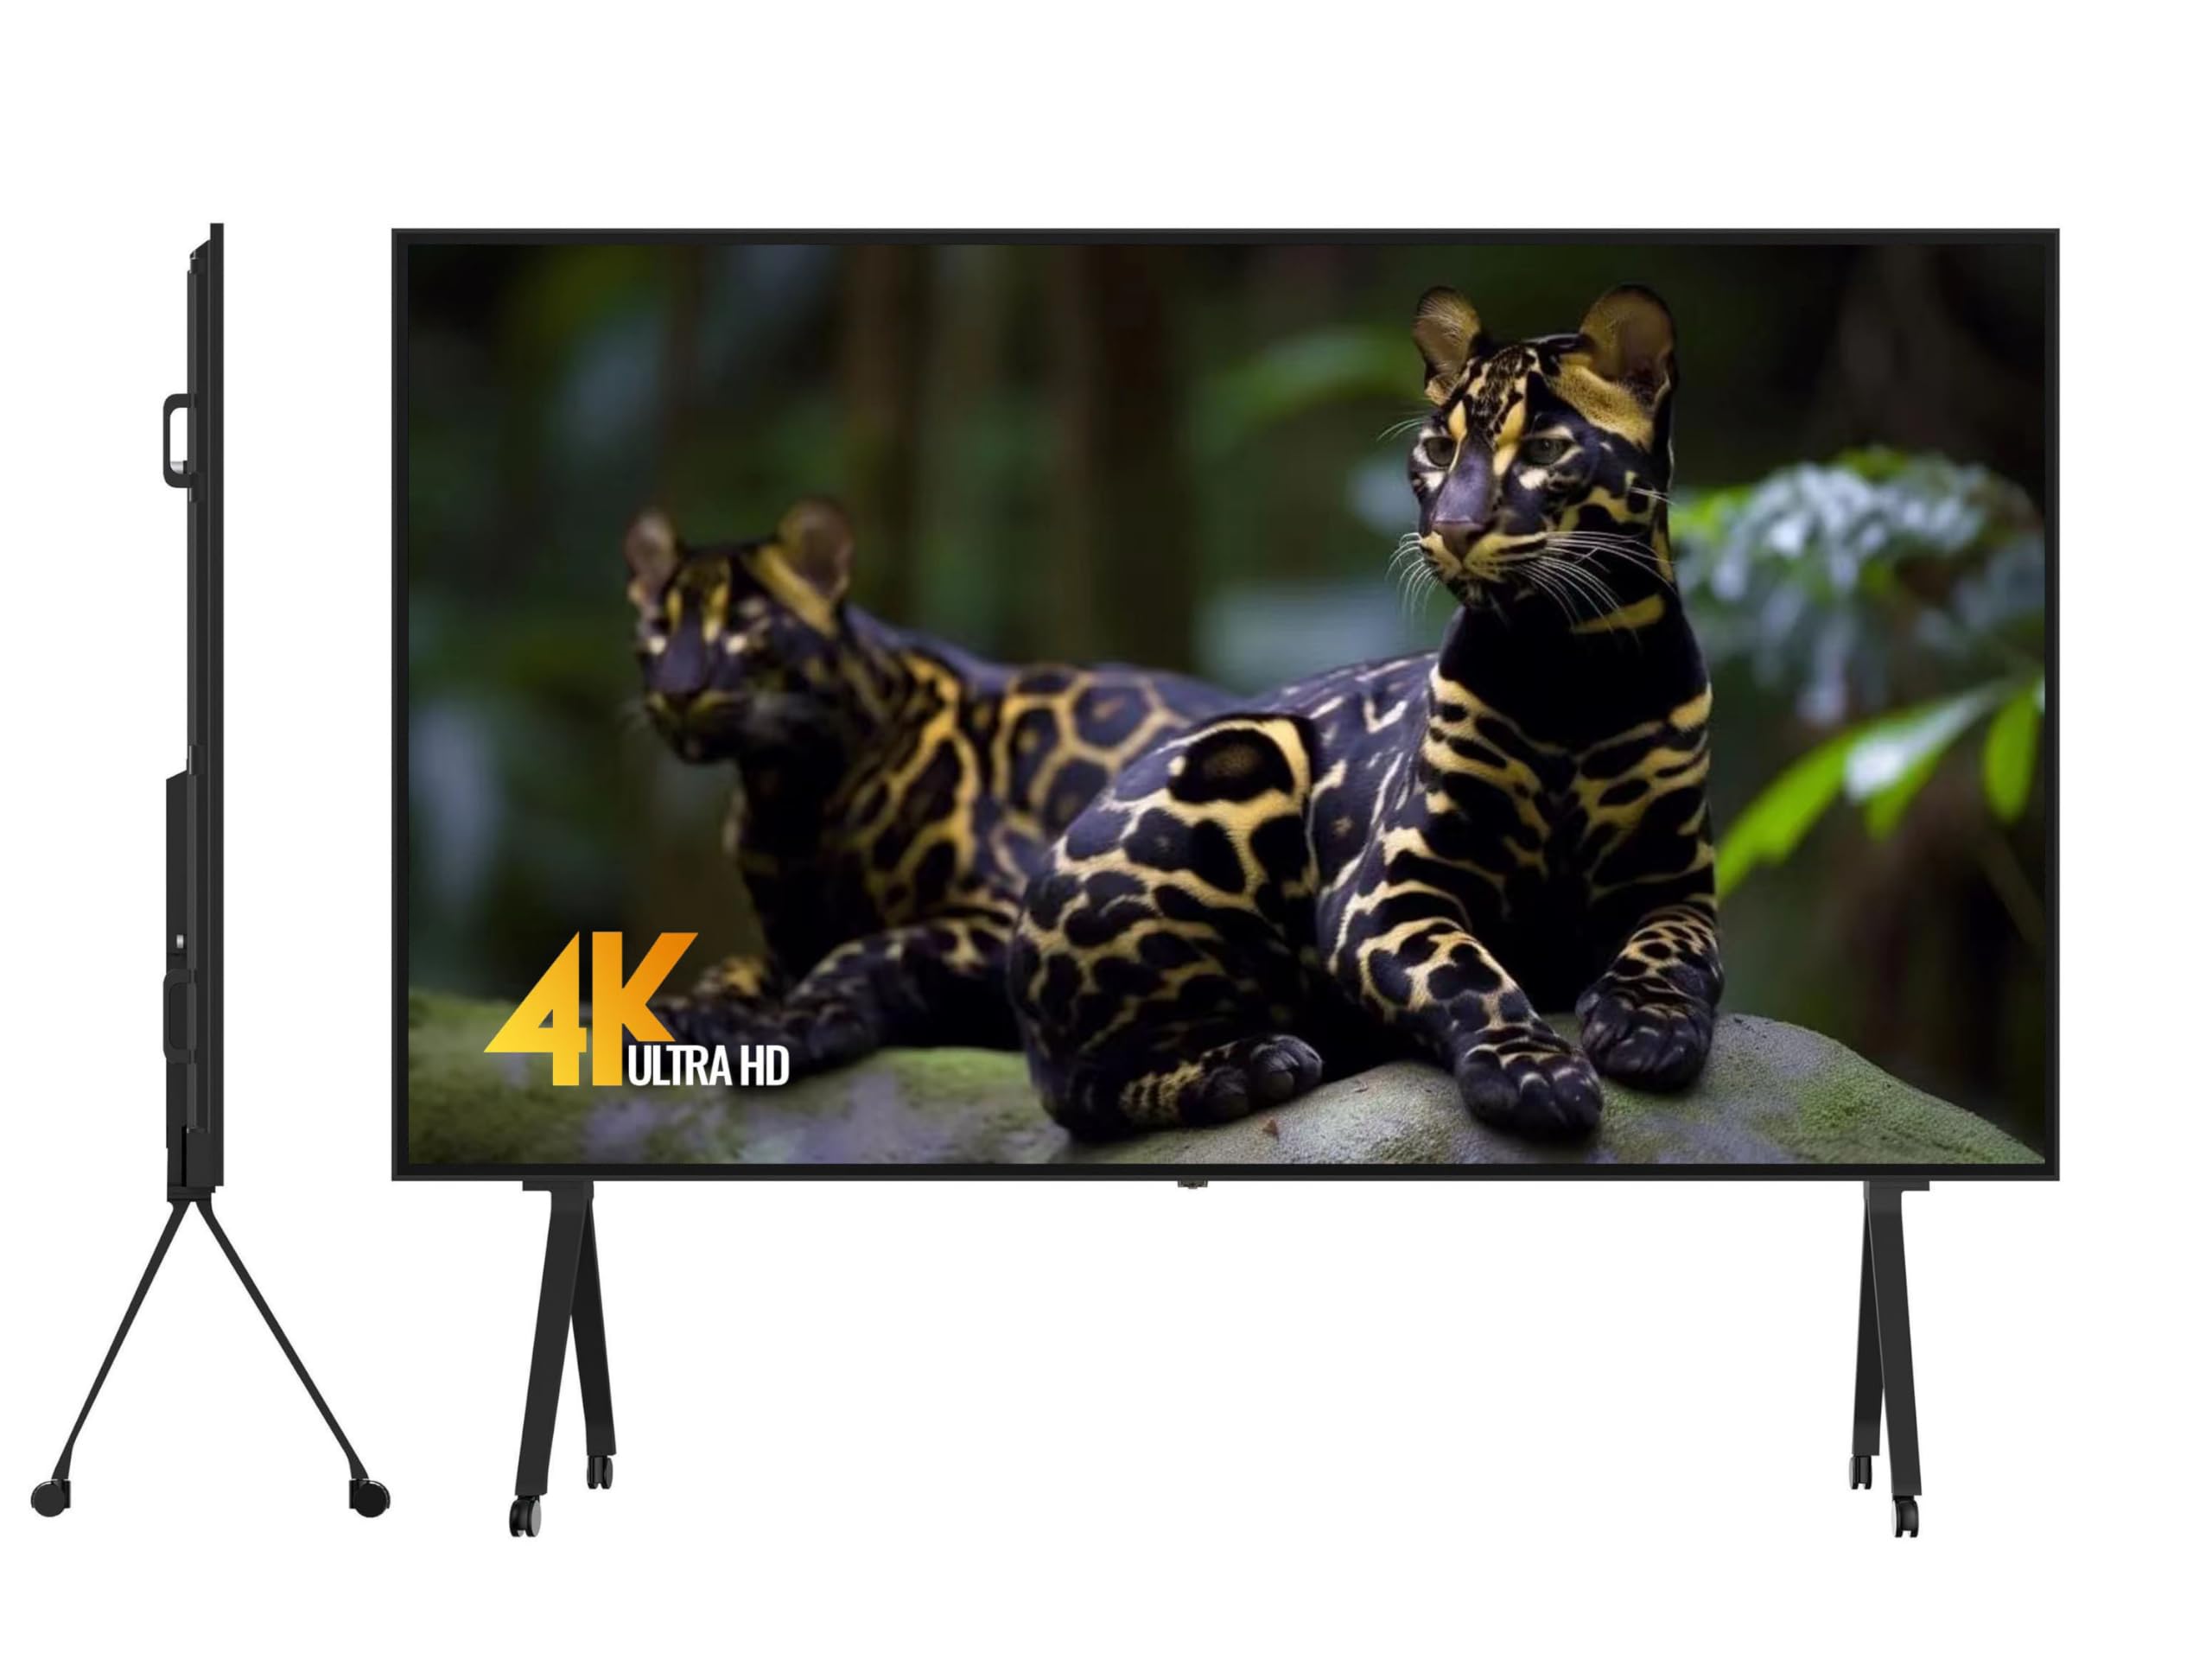 GTUOXIES 108 Inch Movable 4K UHD Smart TV Monitor; TS108TD, Home and Business, Amazing Contrast That Works Beautifully in Indoor Environments